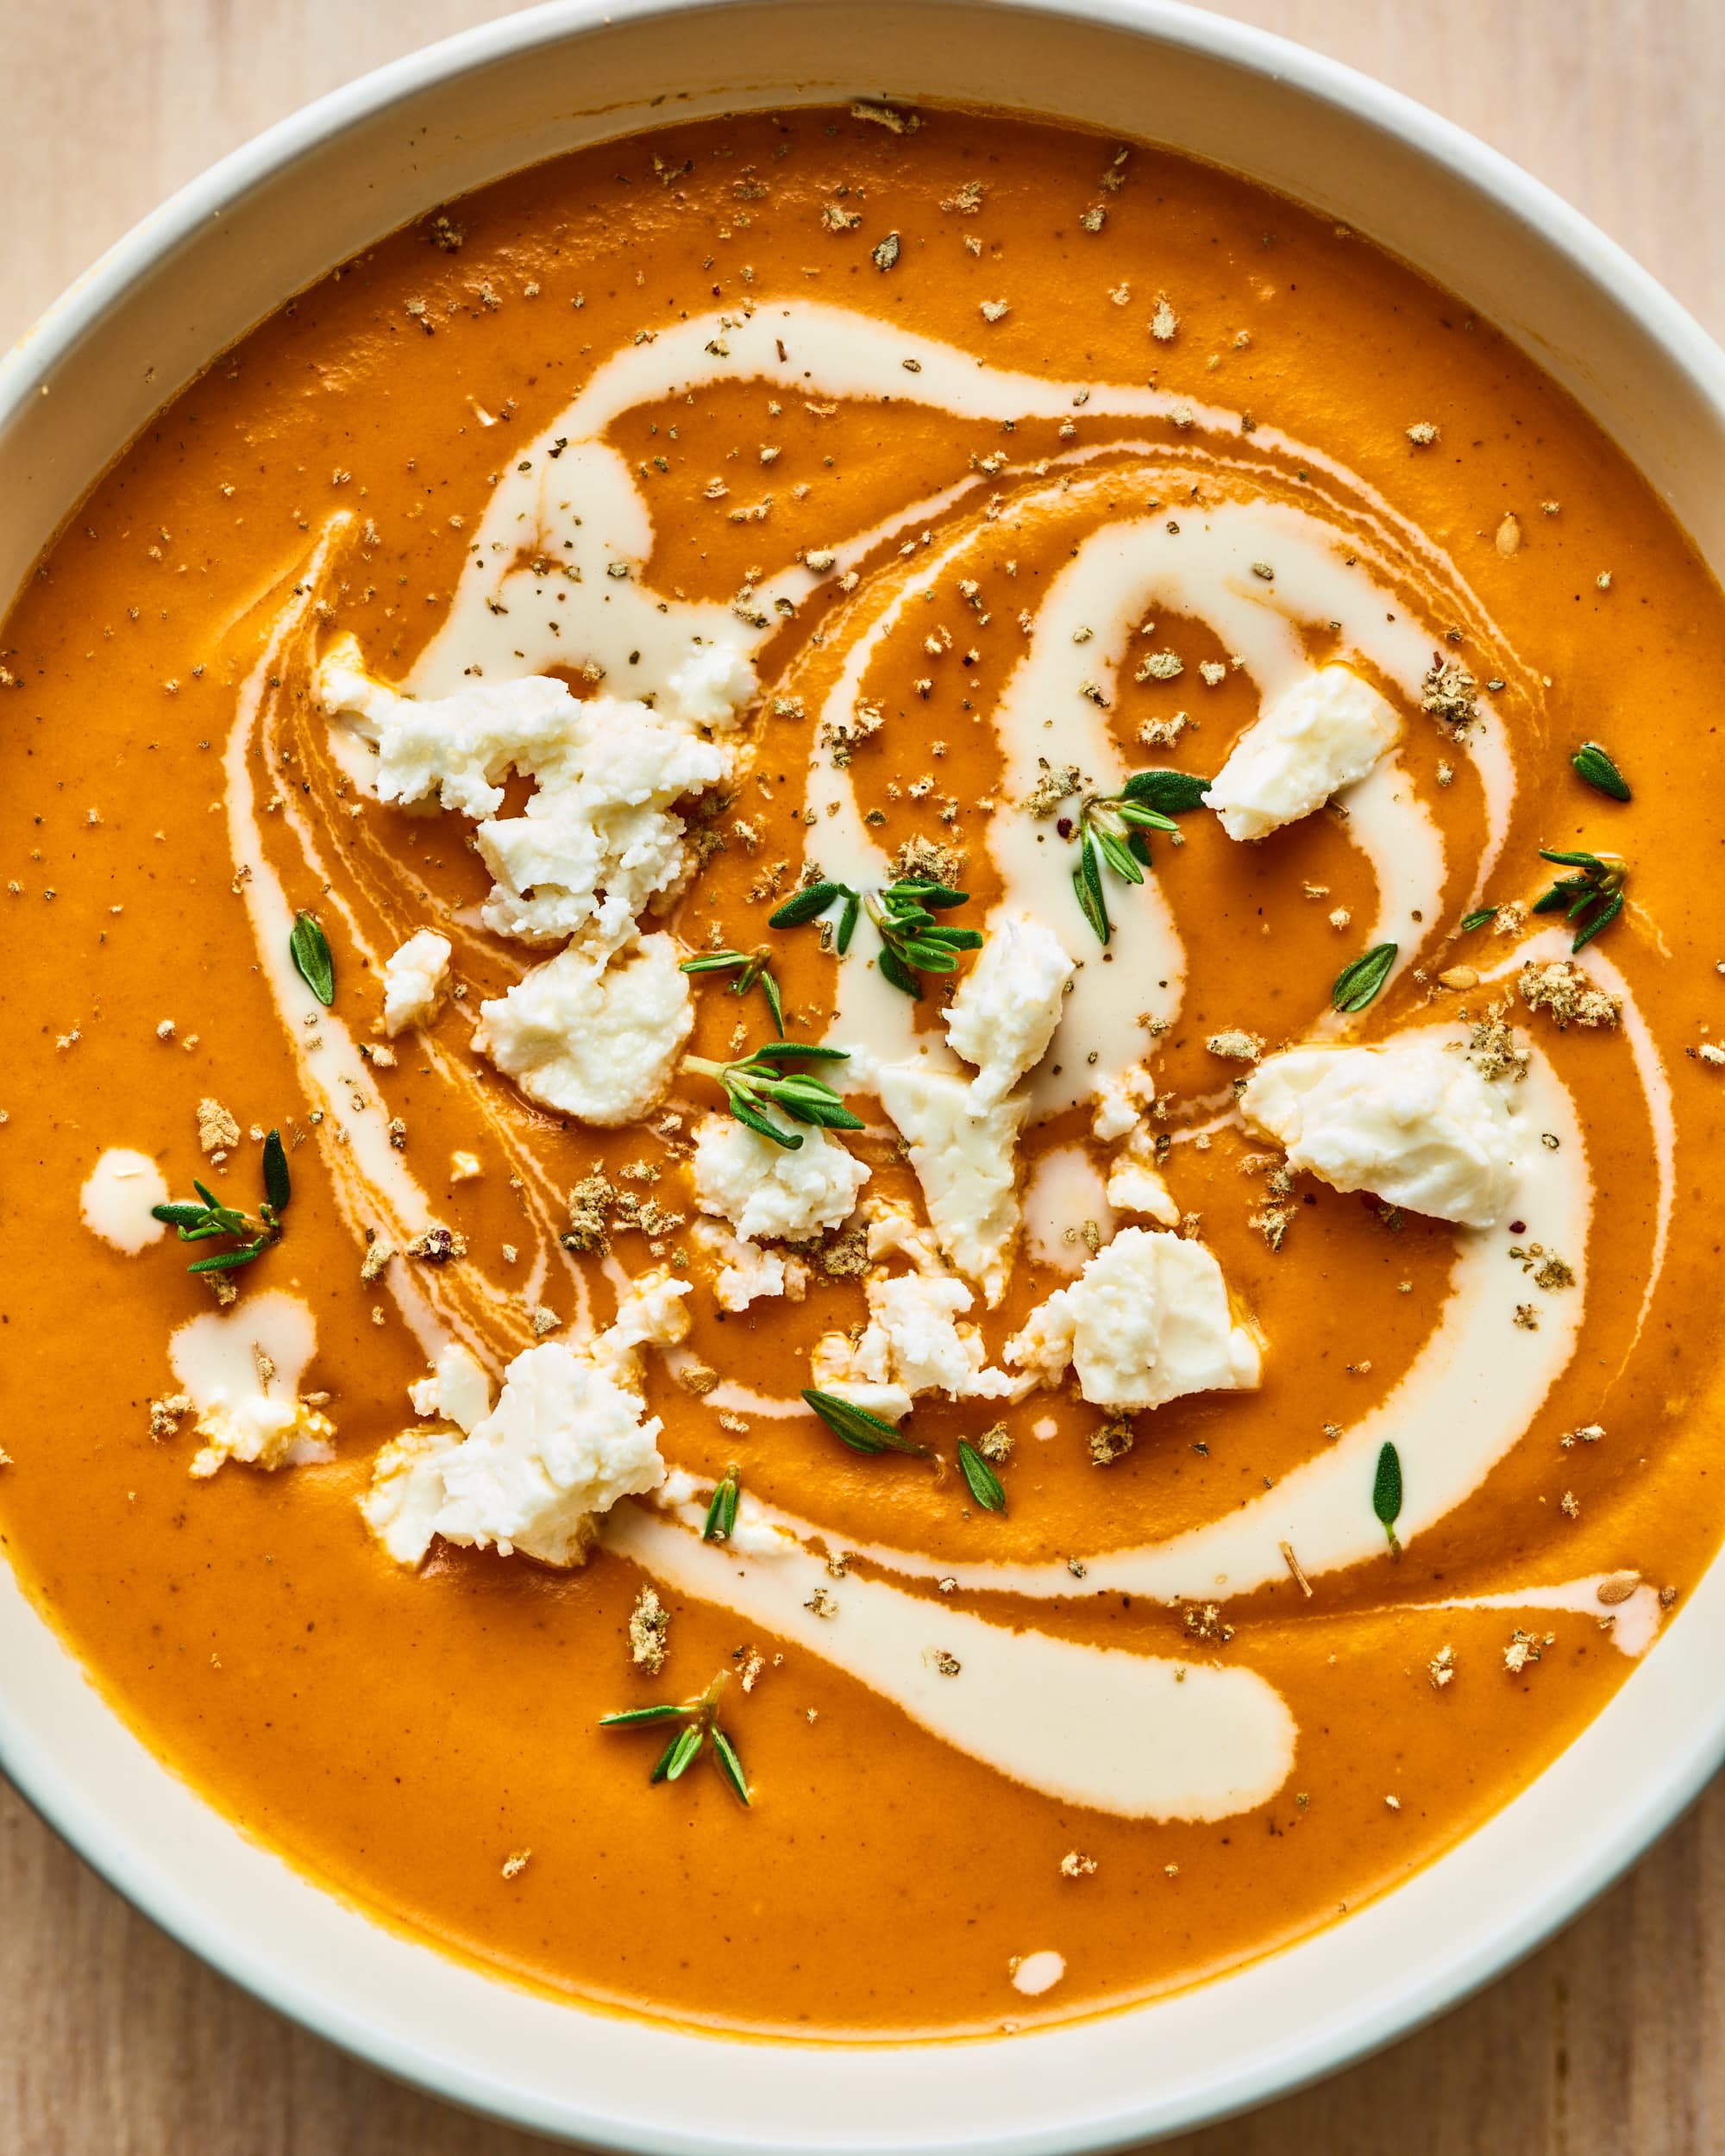 https://cdn.apartmenttherapy.info/image/upload/v1643818029/k/Photo/Series/2022-02_Mediterranean-Monday_Creamy-Roasted-Red-Pepper-Soup-with-Tahini-and-Feta/2022-02-01_ATK1310.jpg